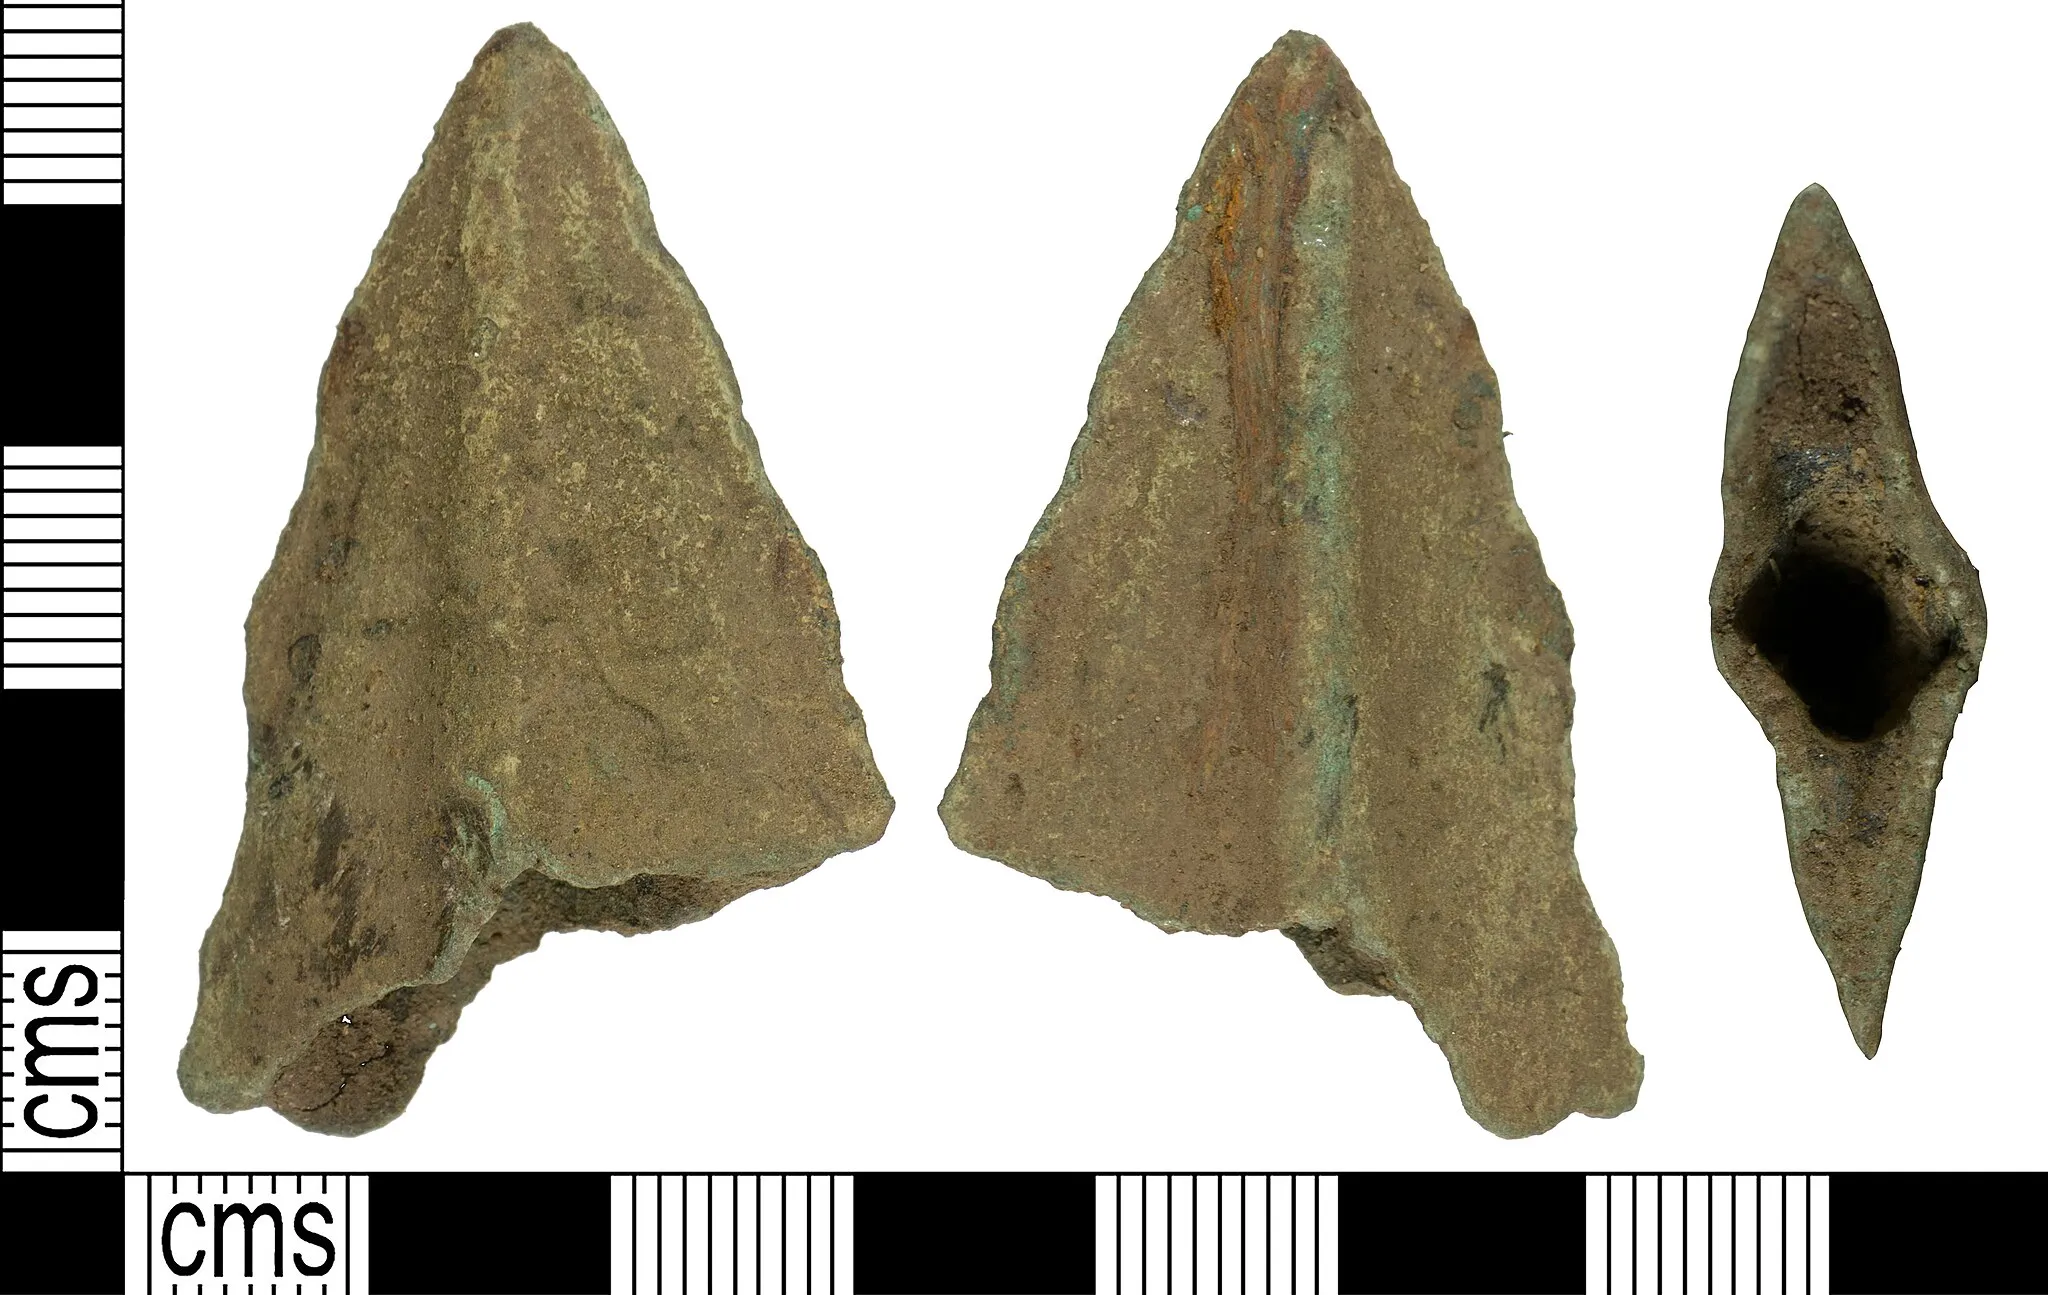 Photo showing: An incomplete copper alloy spear head dating from the Middle to Late Bronze Age, about 1550 – 800 BC. Only the tip of the spear remains which is triangular in shape and lozenge in section. A central rib is present on both faces of the spear extending from the pointed tip to the lozenge terminal end. The blade extends either side of the midrib terminating in abraded edges. The inner portion of the spear head is hollow, in which a wooden shaft would have been fitted. Although insufficient remains to have complete confidence in classifying this object, as the midrib extends to the tip, it is probably comparable with the range of spearheads in Davis Groups 5-11, while its section is possibly most indicative of the Late Bronze Age pegged types, Davis Group 11.
The metal has a mid-green patina and is worn. The spear head is 46.4mm long, 27.3mm wide, 9.2mm thick and weighs 16.1g.
Similar objects recorded on the database are: YORYM-17F9E2 and YORYM-A2E2F3.b